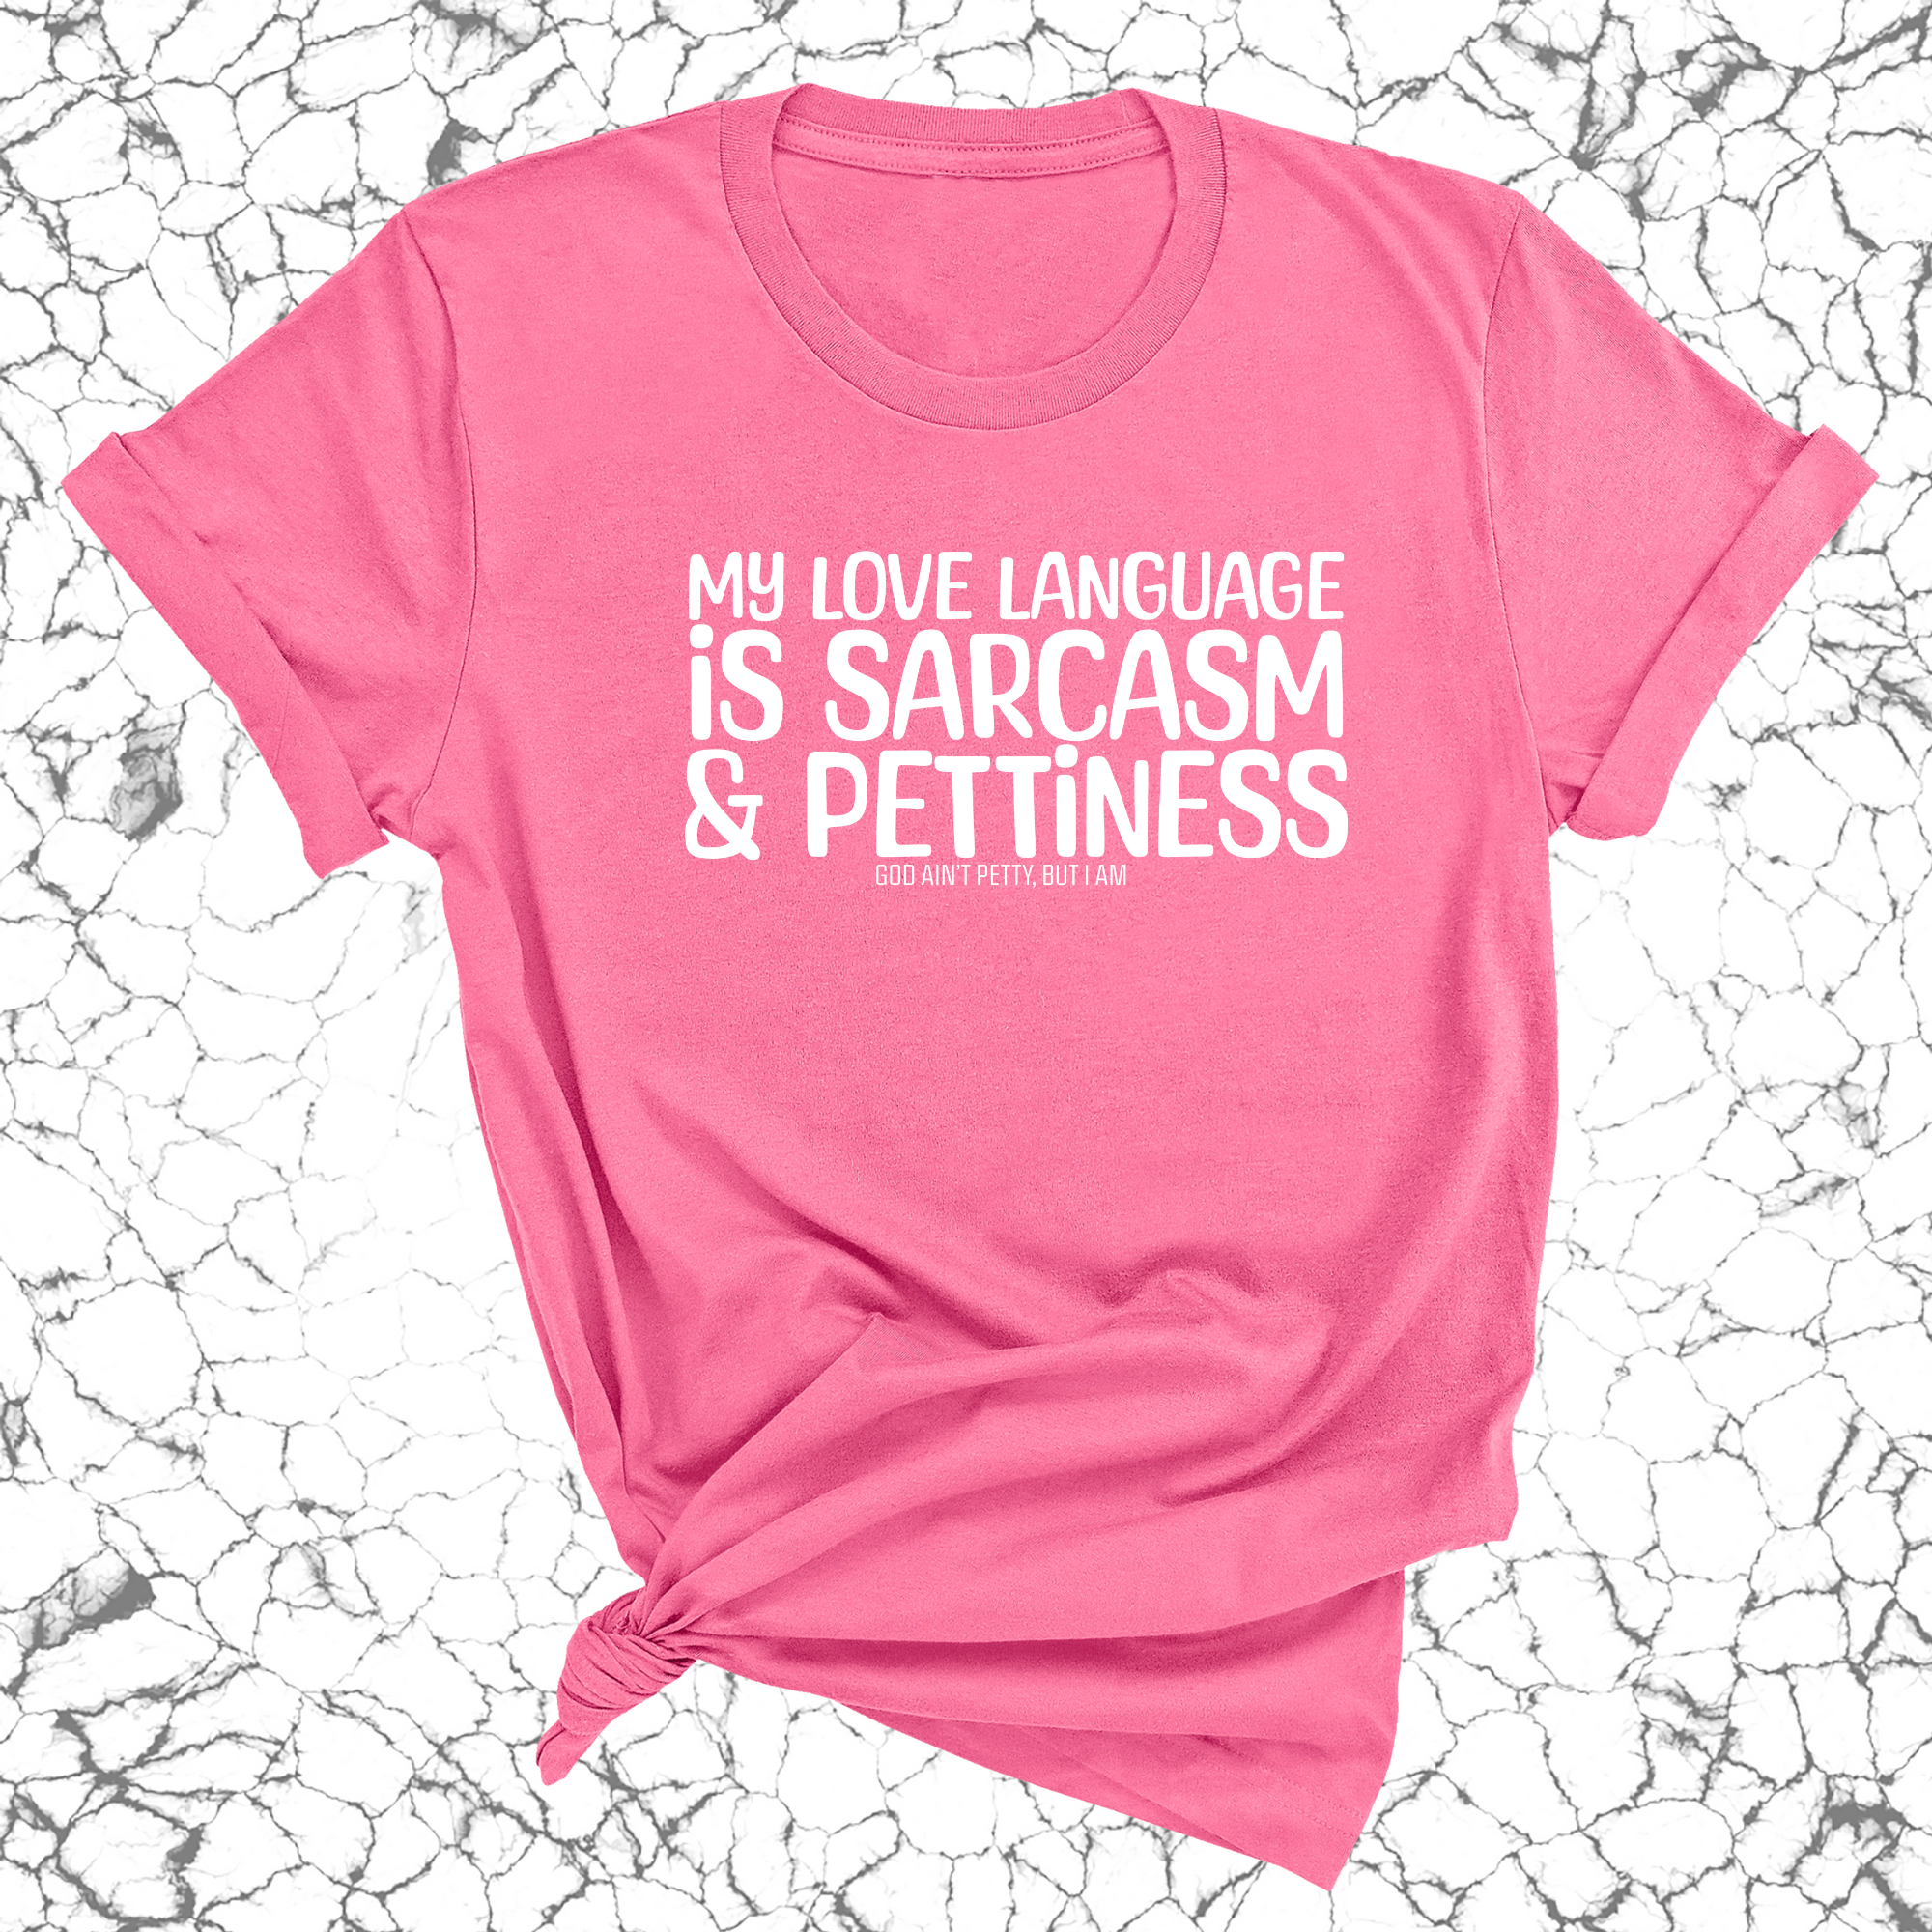 My Love language is Sarcasm and Pettiness Unisex Tee-T-Shirt-The Original God Ain't Petty But I Am